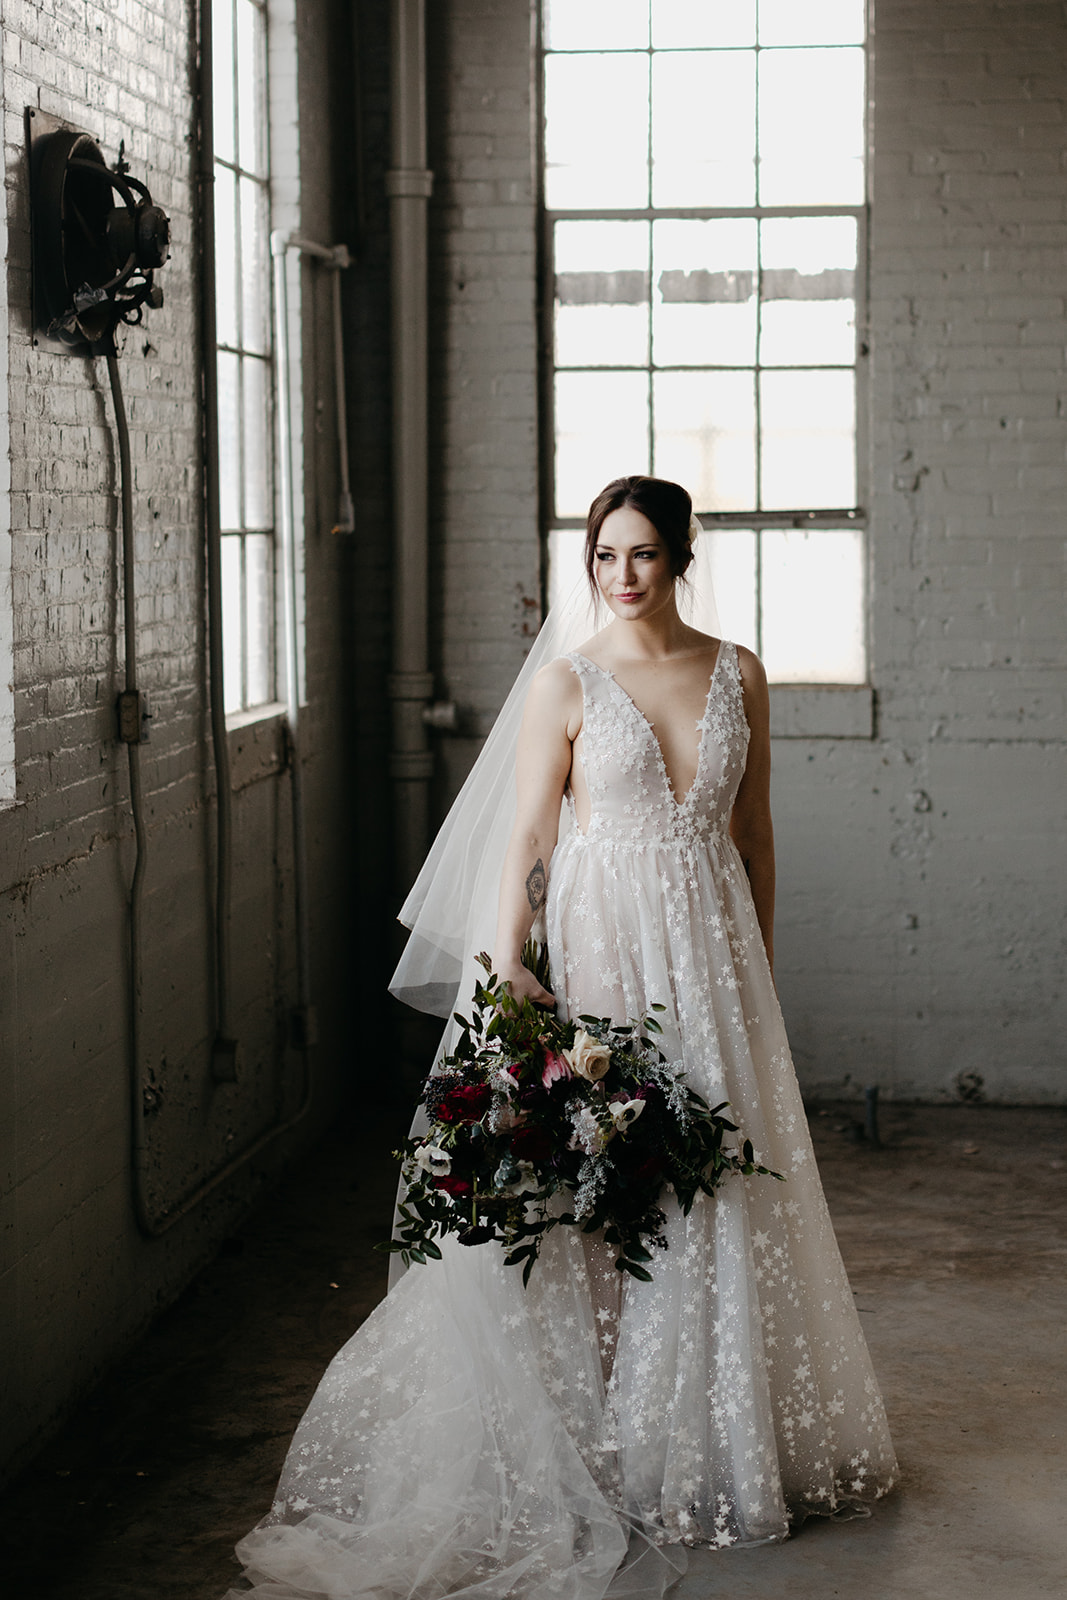 Starry wedding dress with an untamed, airy bridal bouquet with garden roses, ranunculus, and anemones in hues of burgundy and jewel tones.